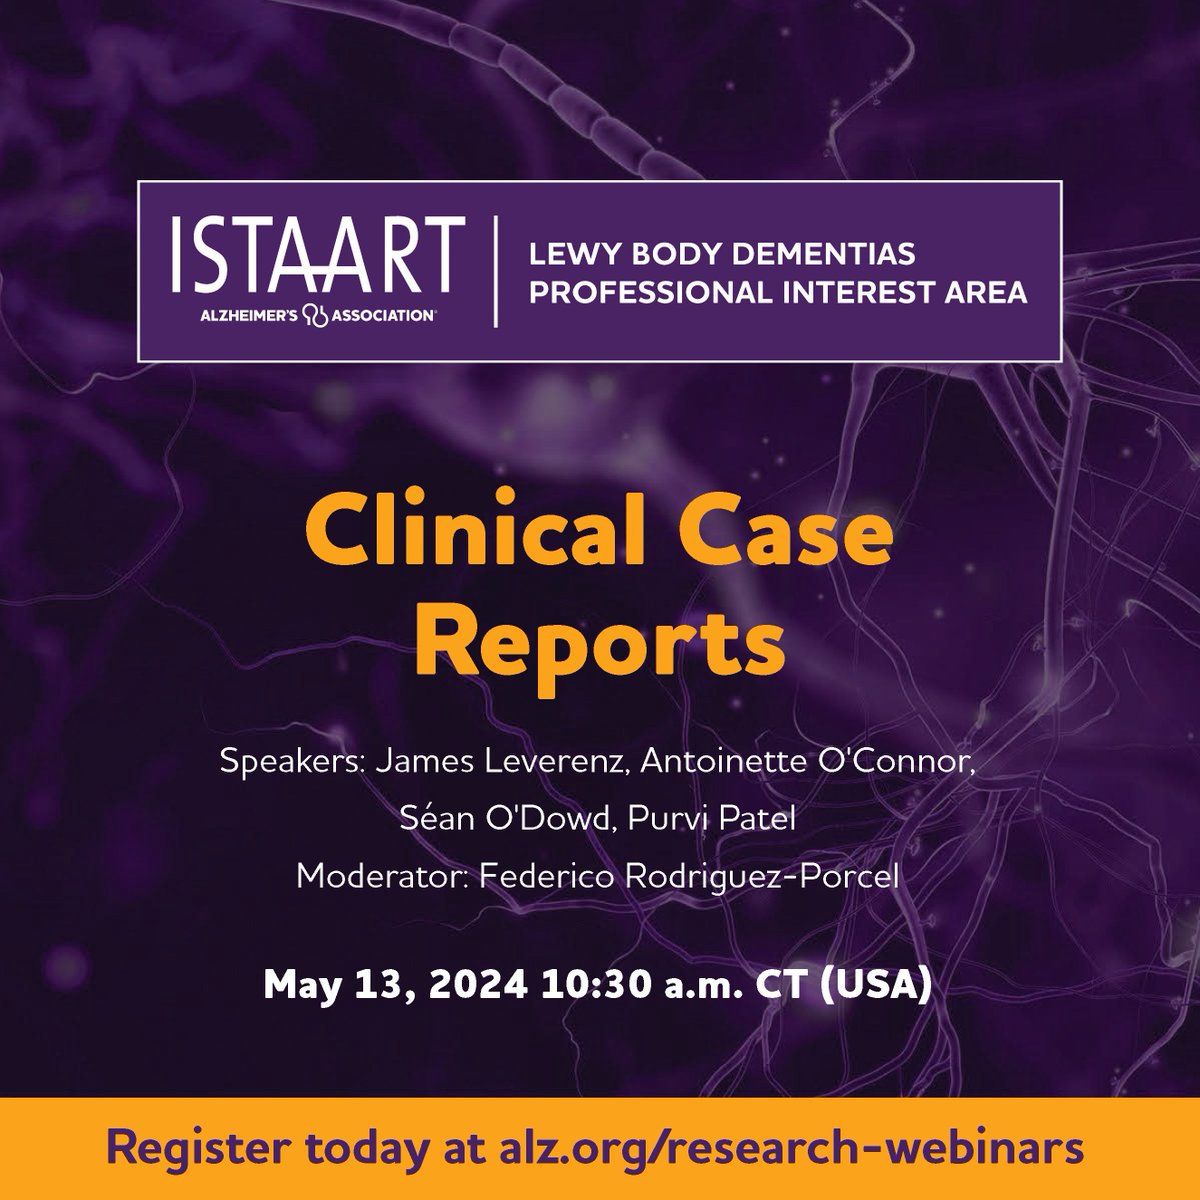 On behalf of @LBDPIA I'm very excited to share an invite to our upcoming 'Clinical Case Reports' webinar on May 13th. Hosted by our own @fedrodriguezp, it will discuss how our evolving understanding of LBD can influence both your clinical practice & research.